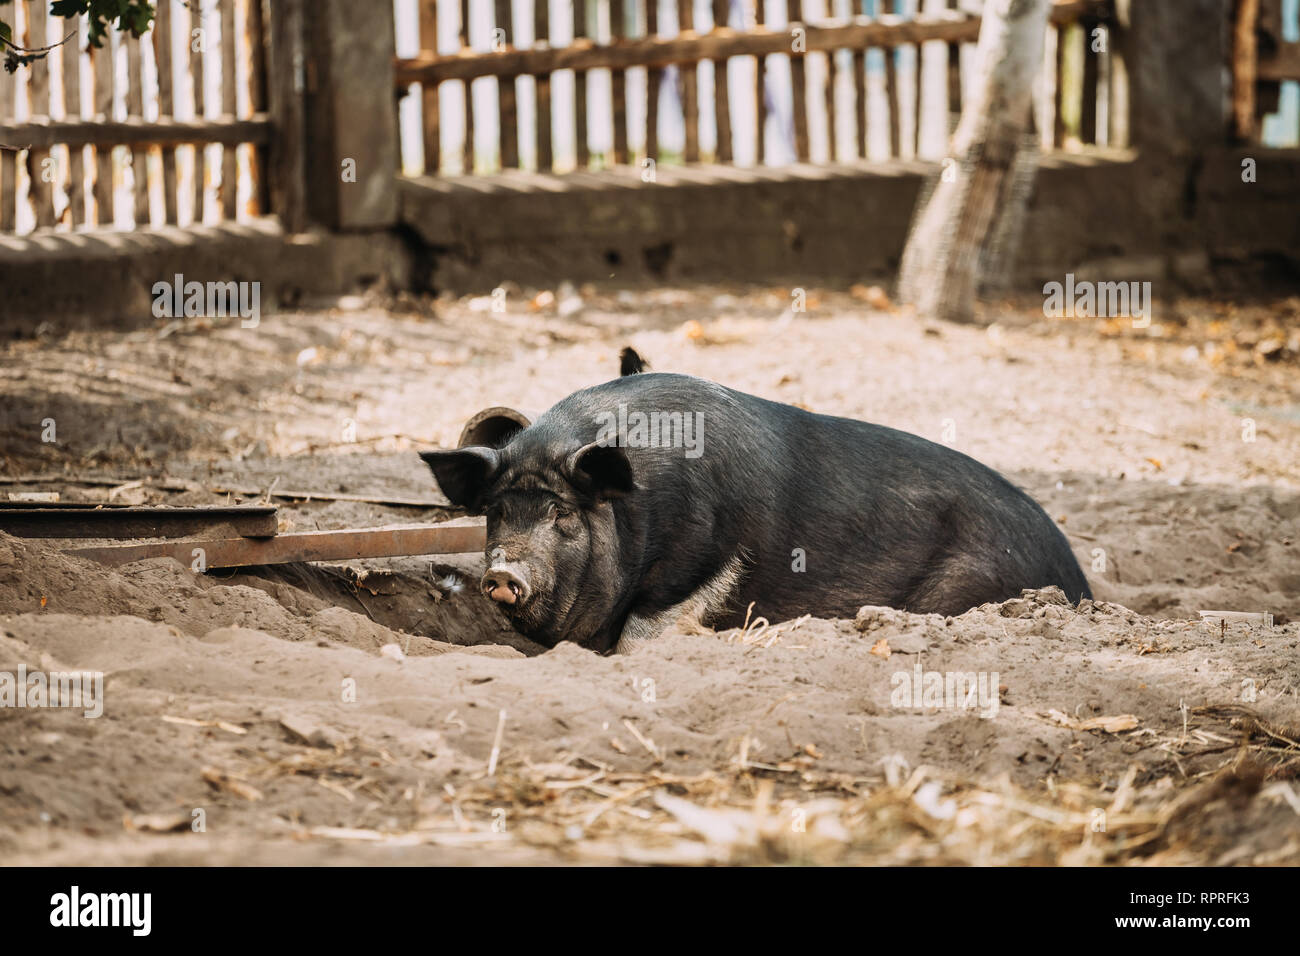 Large Black Pig In Farm. Pig Farming Is Raising And Breeding Of Domestic Pigs. It Is A Branch Of Animal Husbandry. Pigs Are Raised Principally As Food Stock Photo